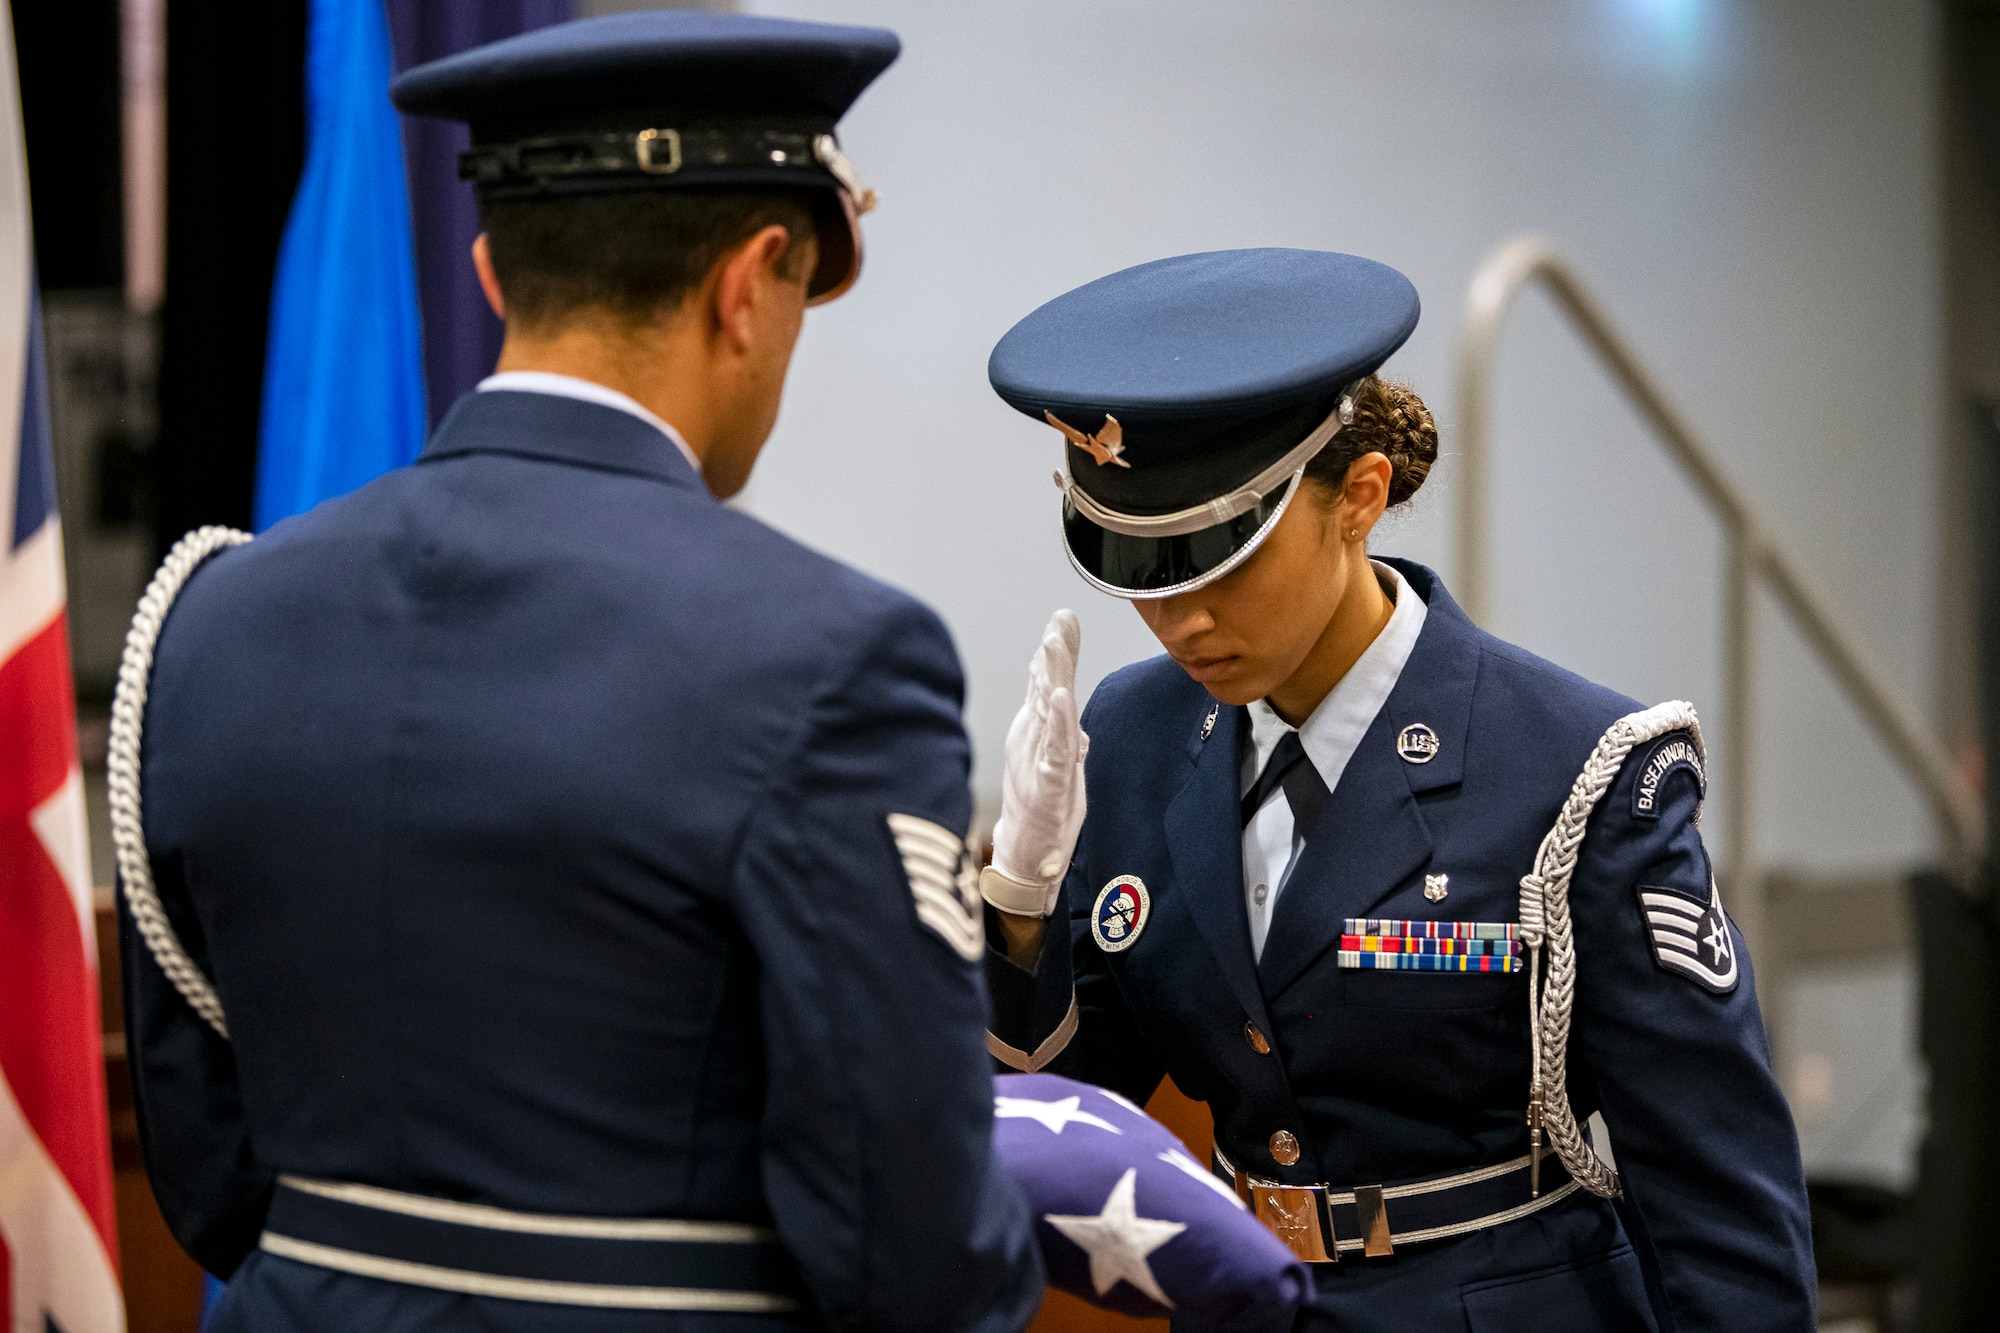 An Airman from the 422d Air Base Group honor guard, dresses a flag during a 9/11 retreat ceremony at RAF Croughton, England, Sep. 9, 2022. Airmen and guests participated in the ceremony to honor those who lost their lives during the September 11th terrorist attacks. (U.S. Air Force photo by Staff Sgt. Eugene Oliver)